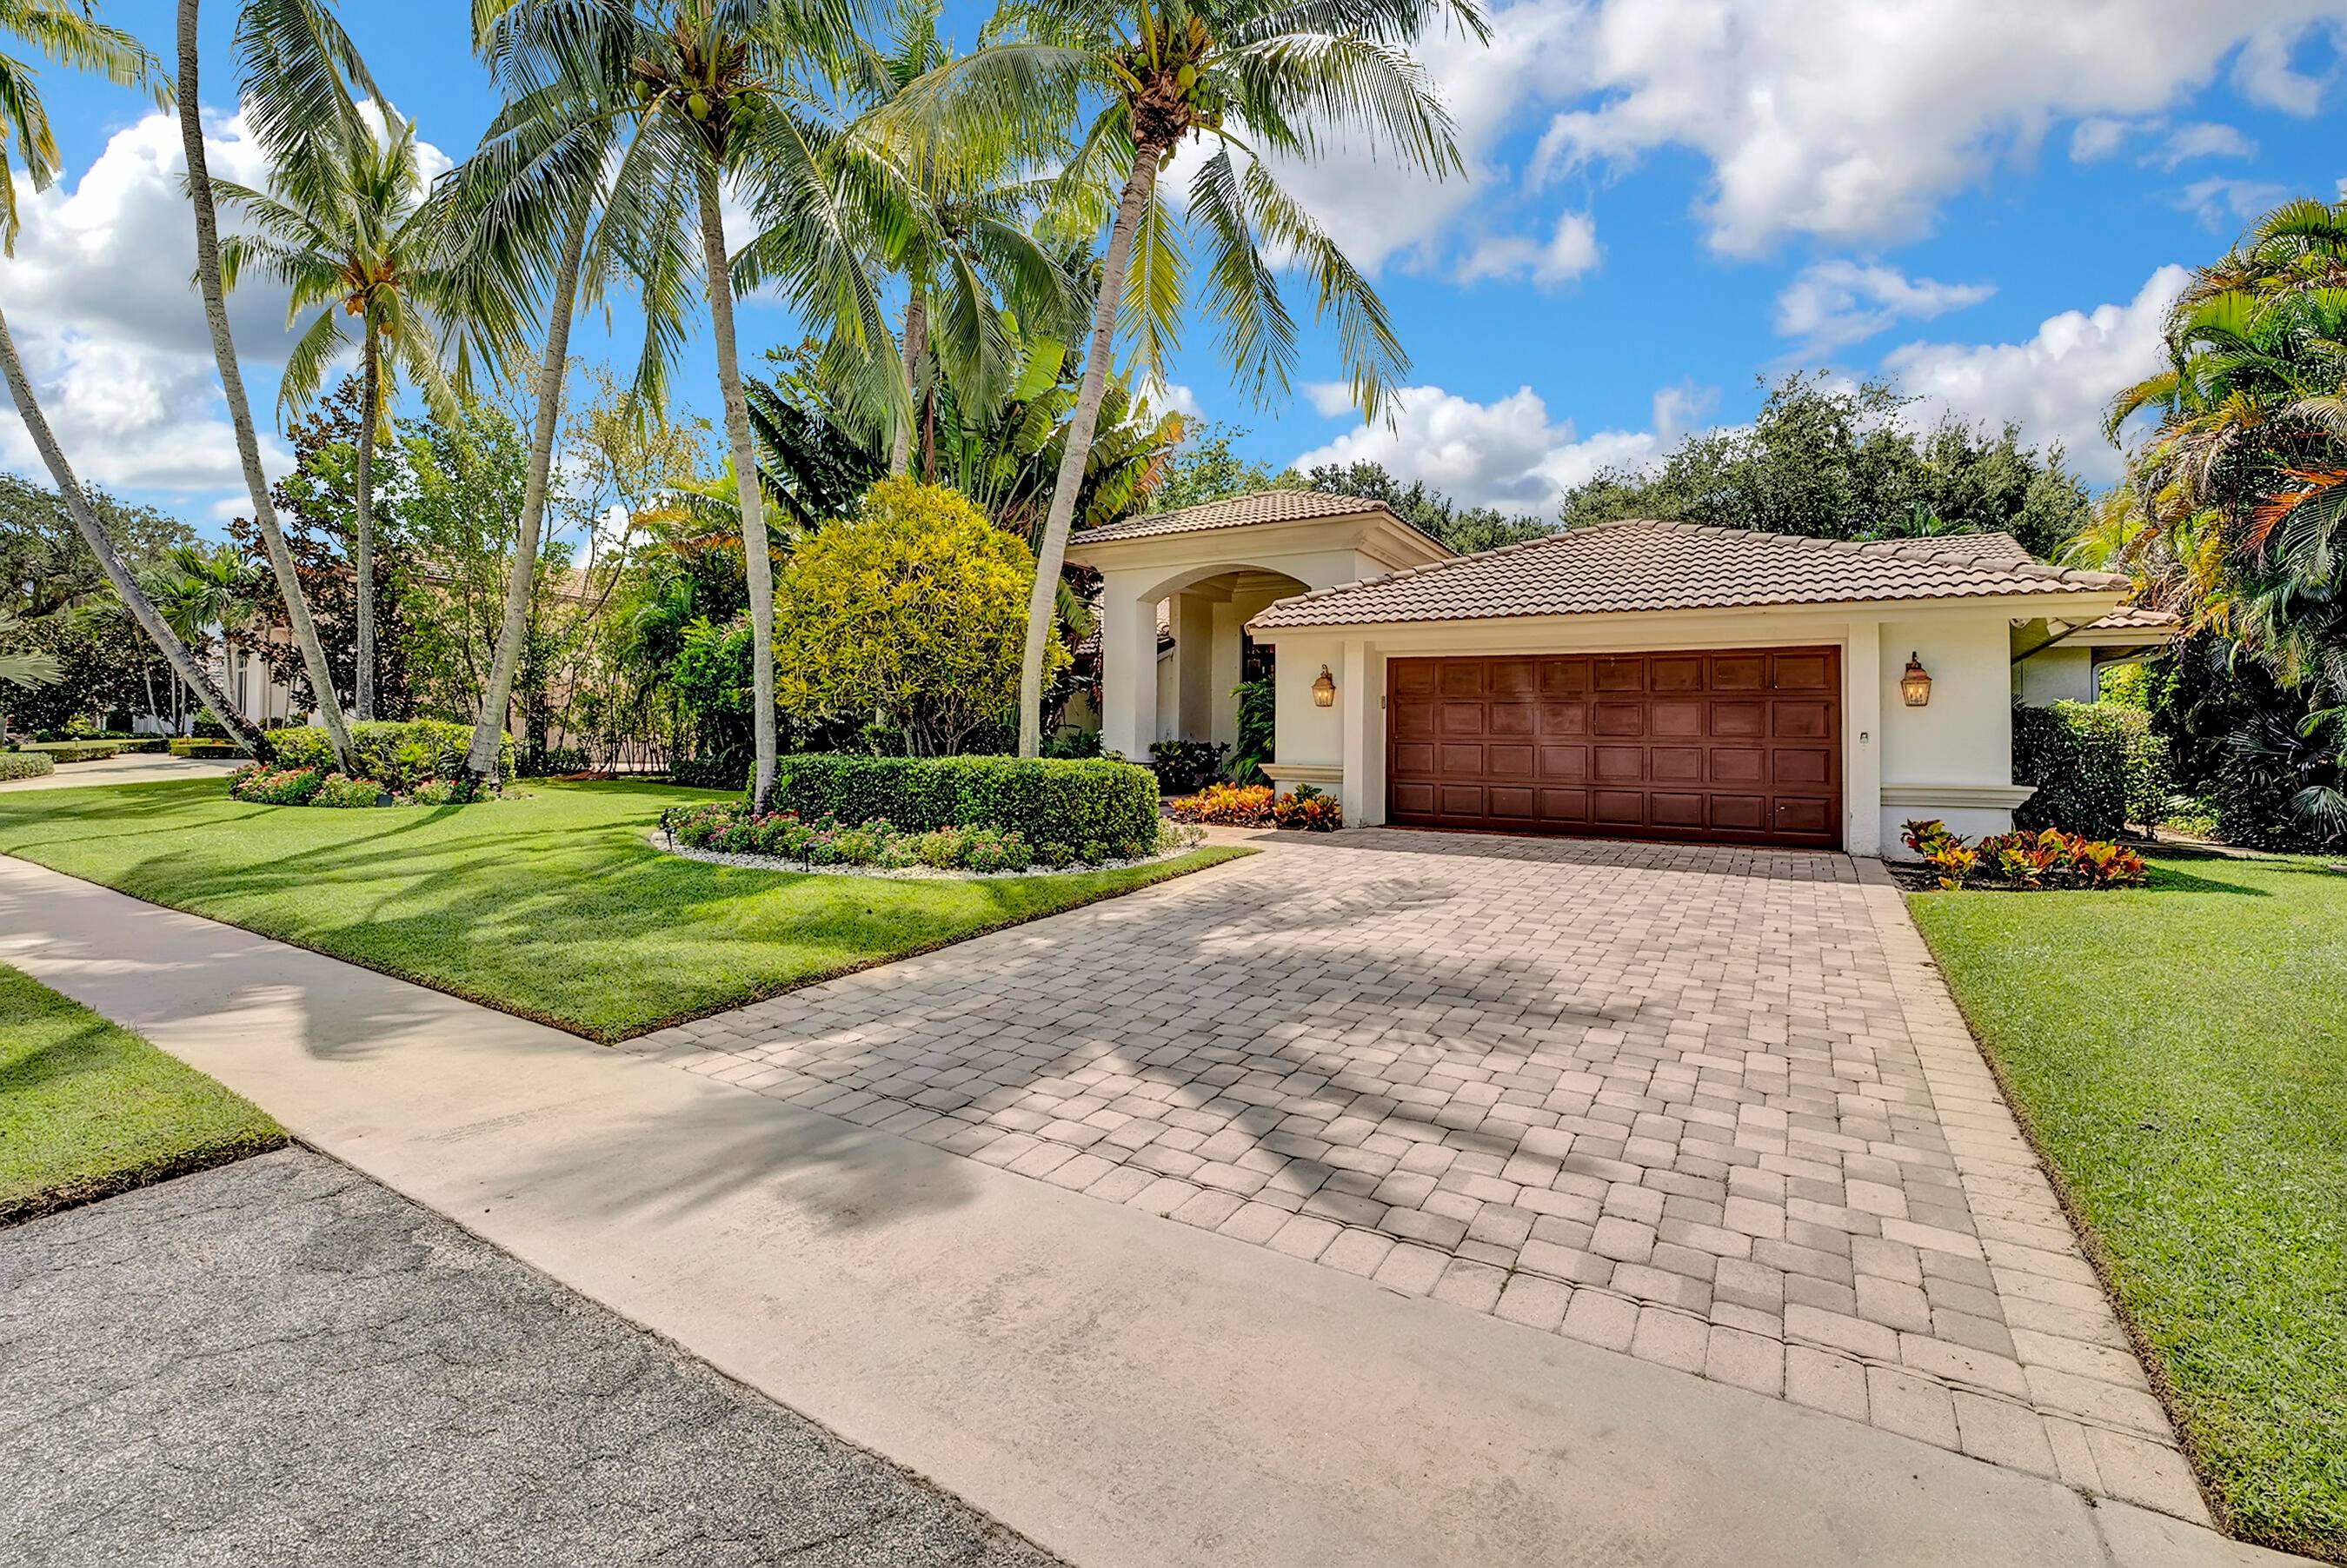 Situated on a secluded lot, this delightful home masterfully combines privacy with an enchanting vista of the golf course's wooded surroundings.